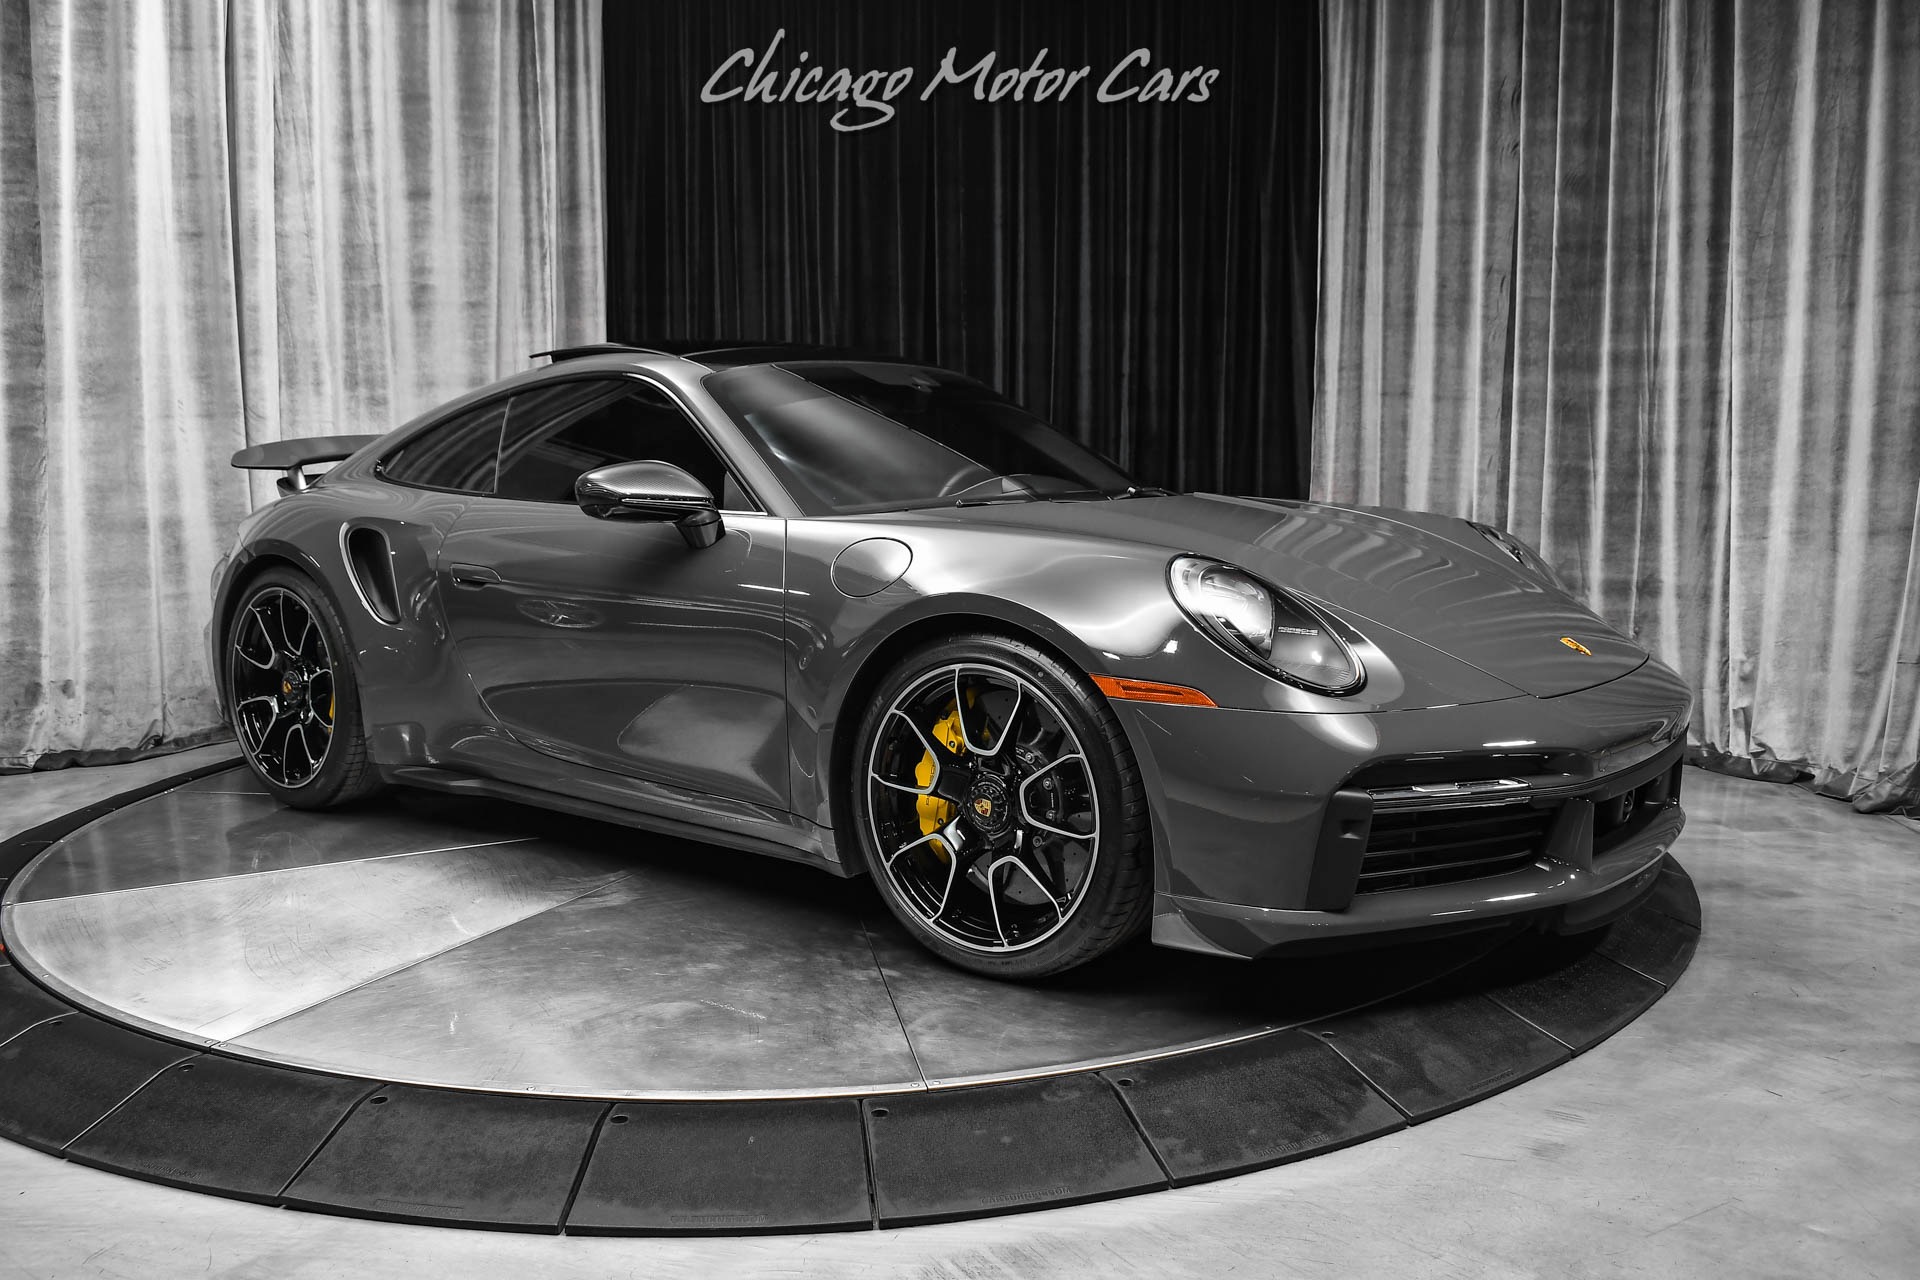 Used-2021-Porsche-911-Turbo-S-Coupe-Highly-Desired-PTS-Grey-Black-4k-Miles-Burmester-Front-PPF